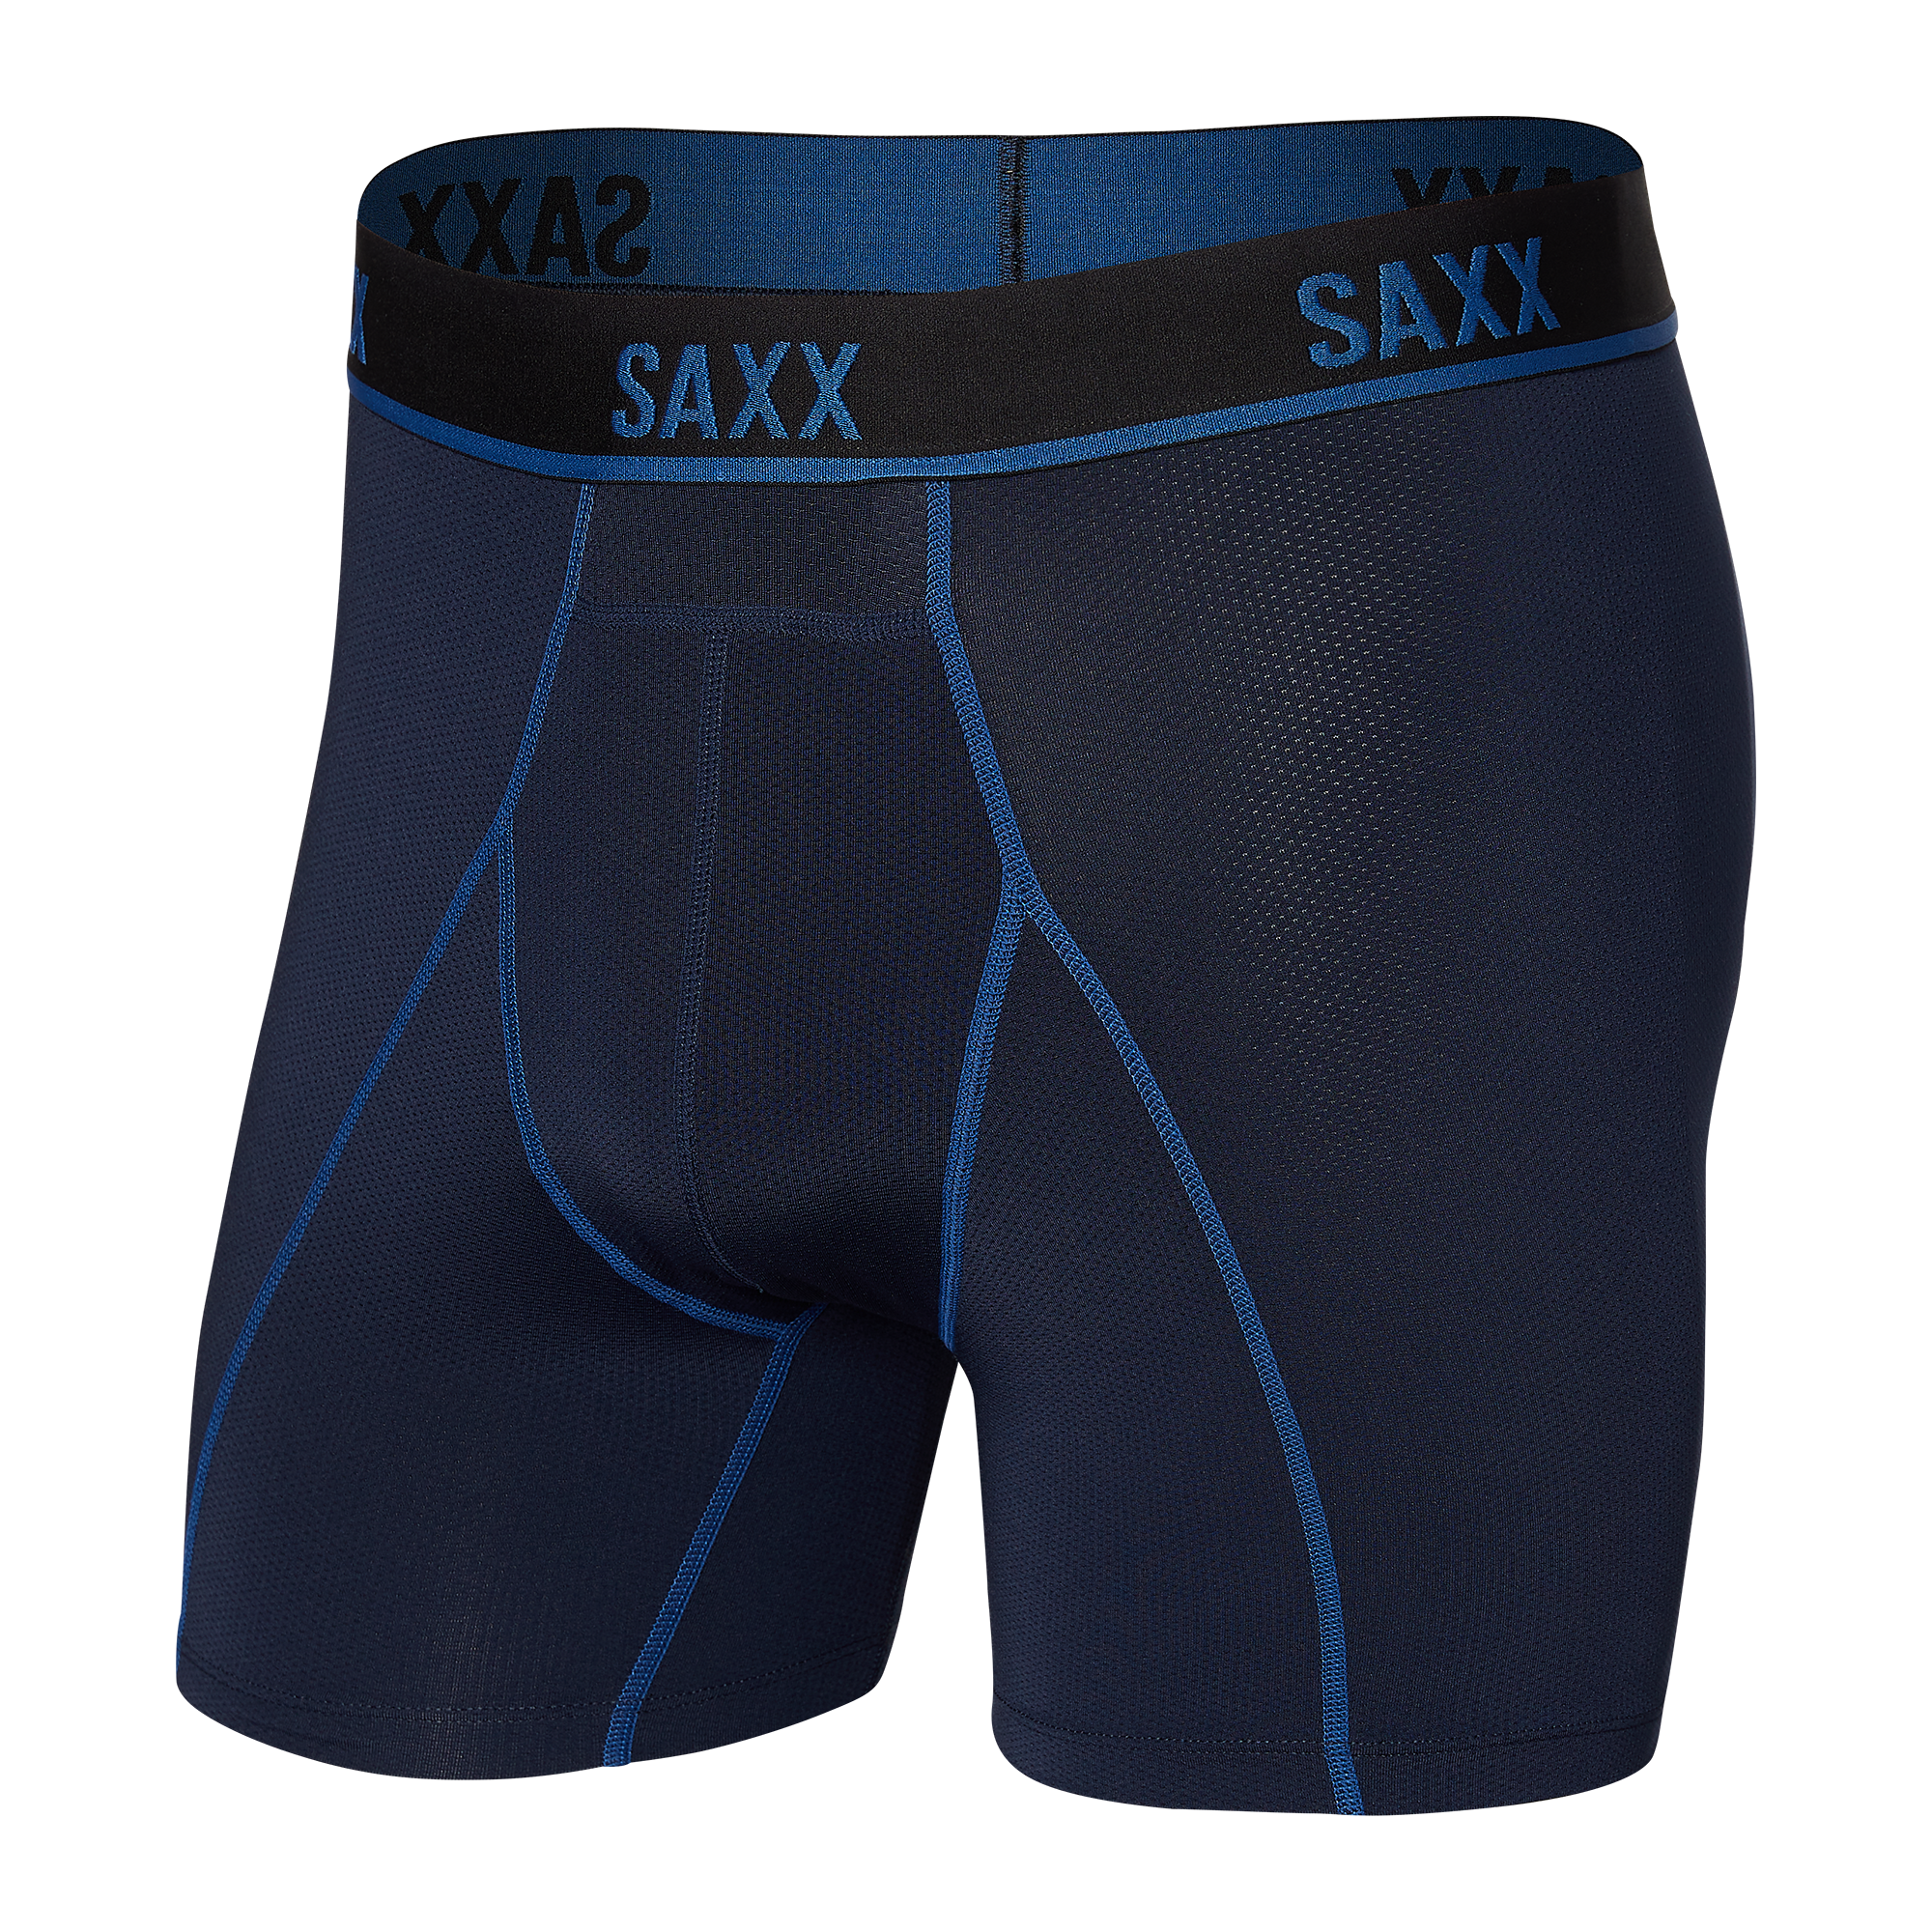  SAXX Men's Underwear - Droptemp Cooling Cotton with Built-in  Pouch Support - Underwear for Men : Clothing, Shoes & Jewelry